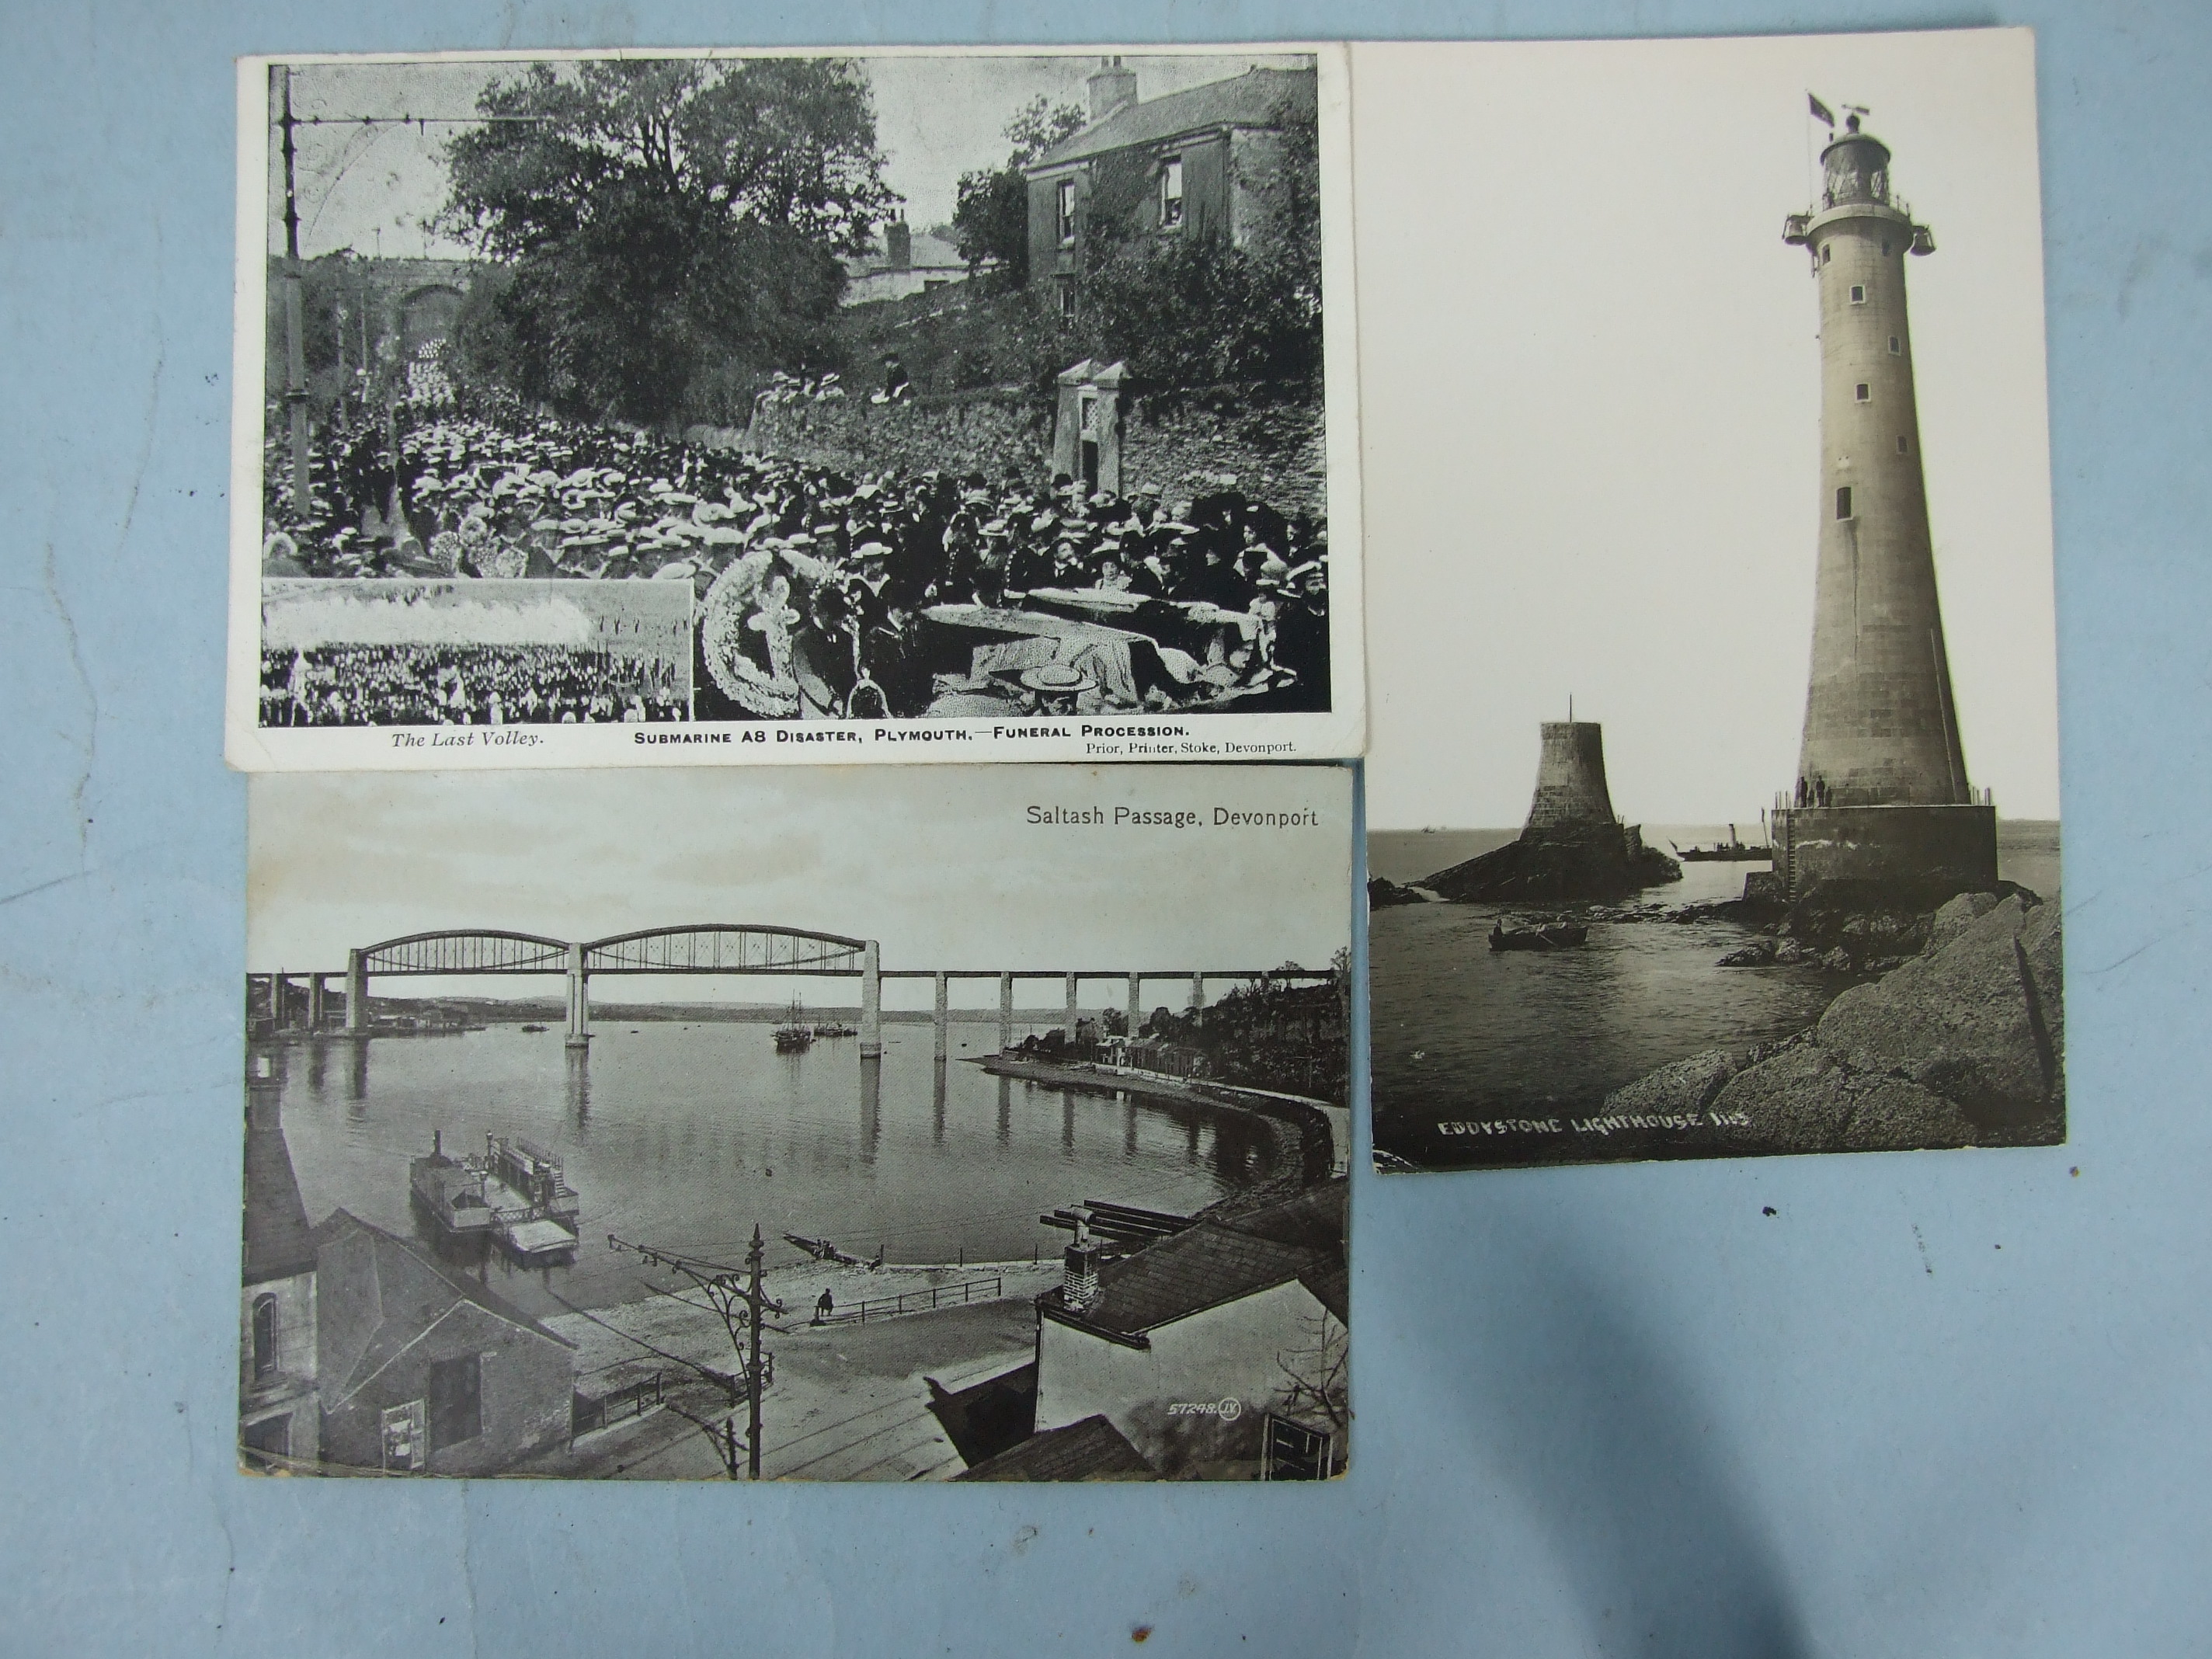 An album of 180 postcards of Plymouth including one of the submarine A8 disaster funeral procession, - Image 2 of 2